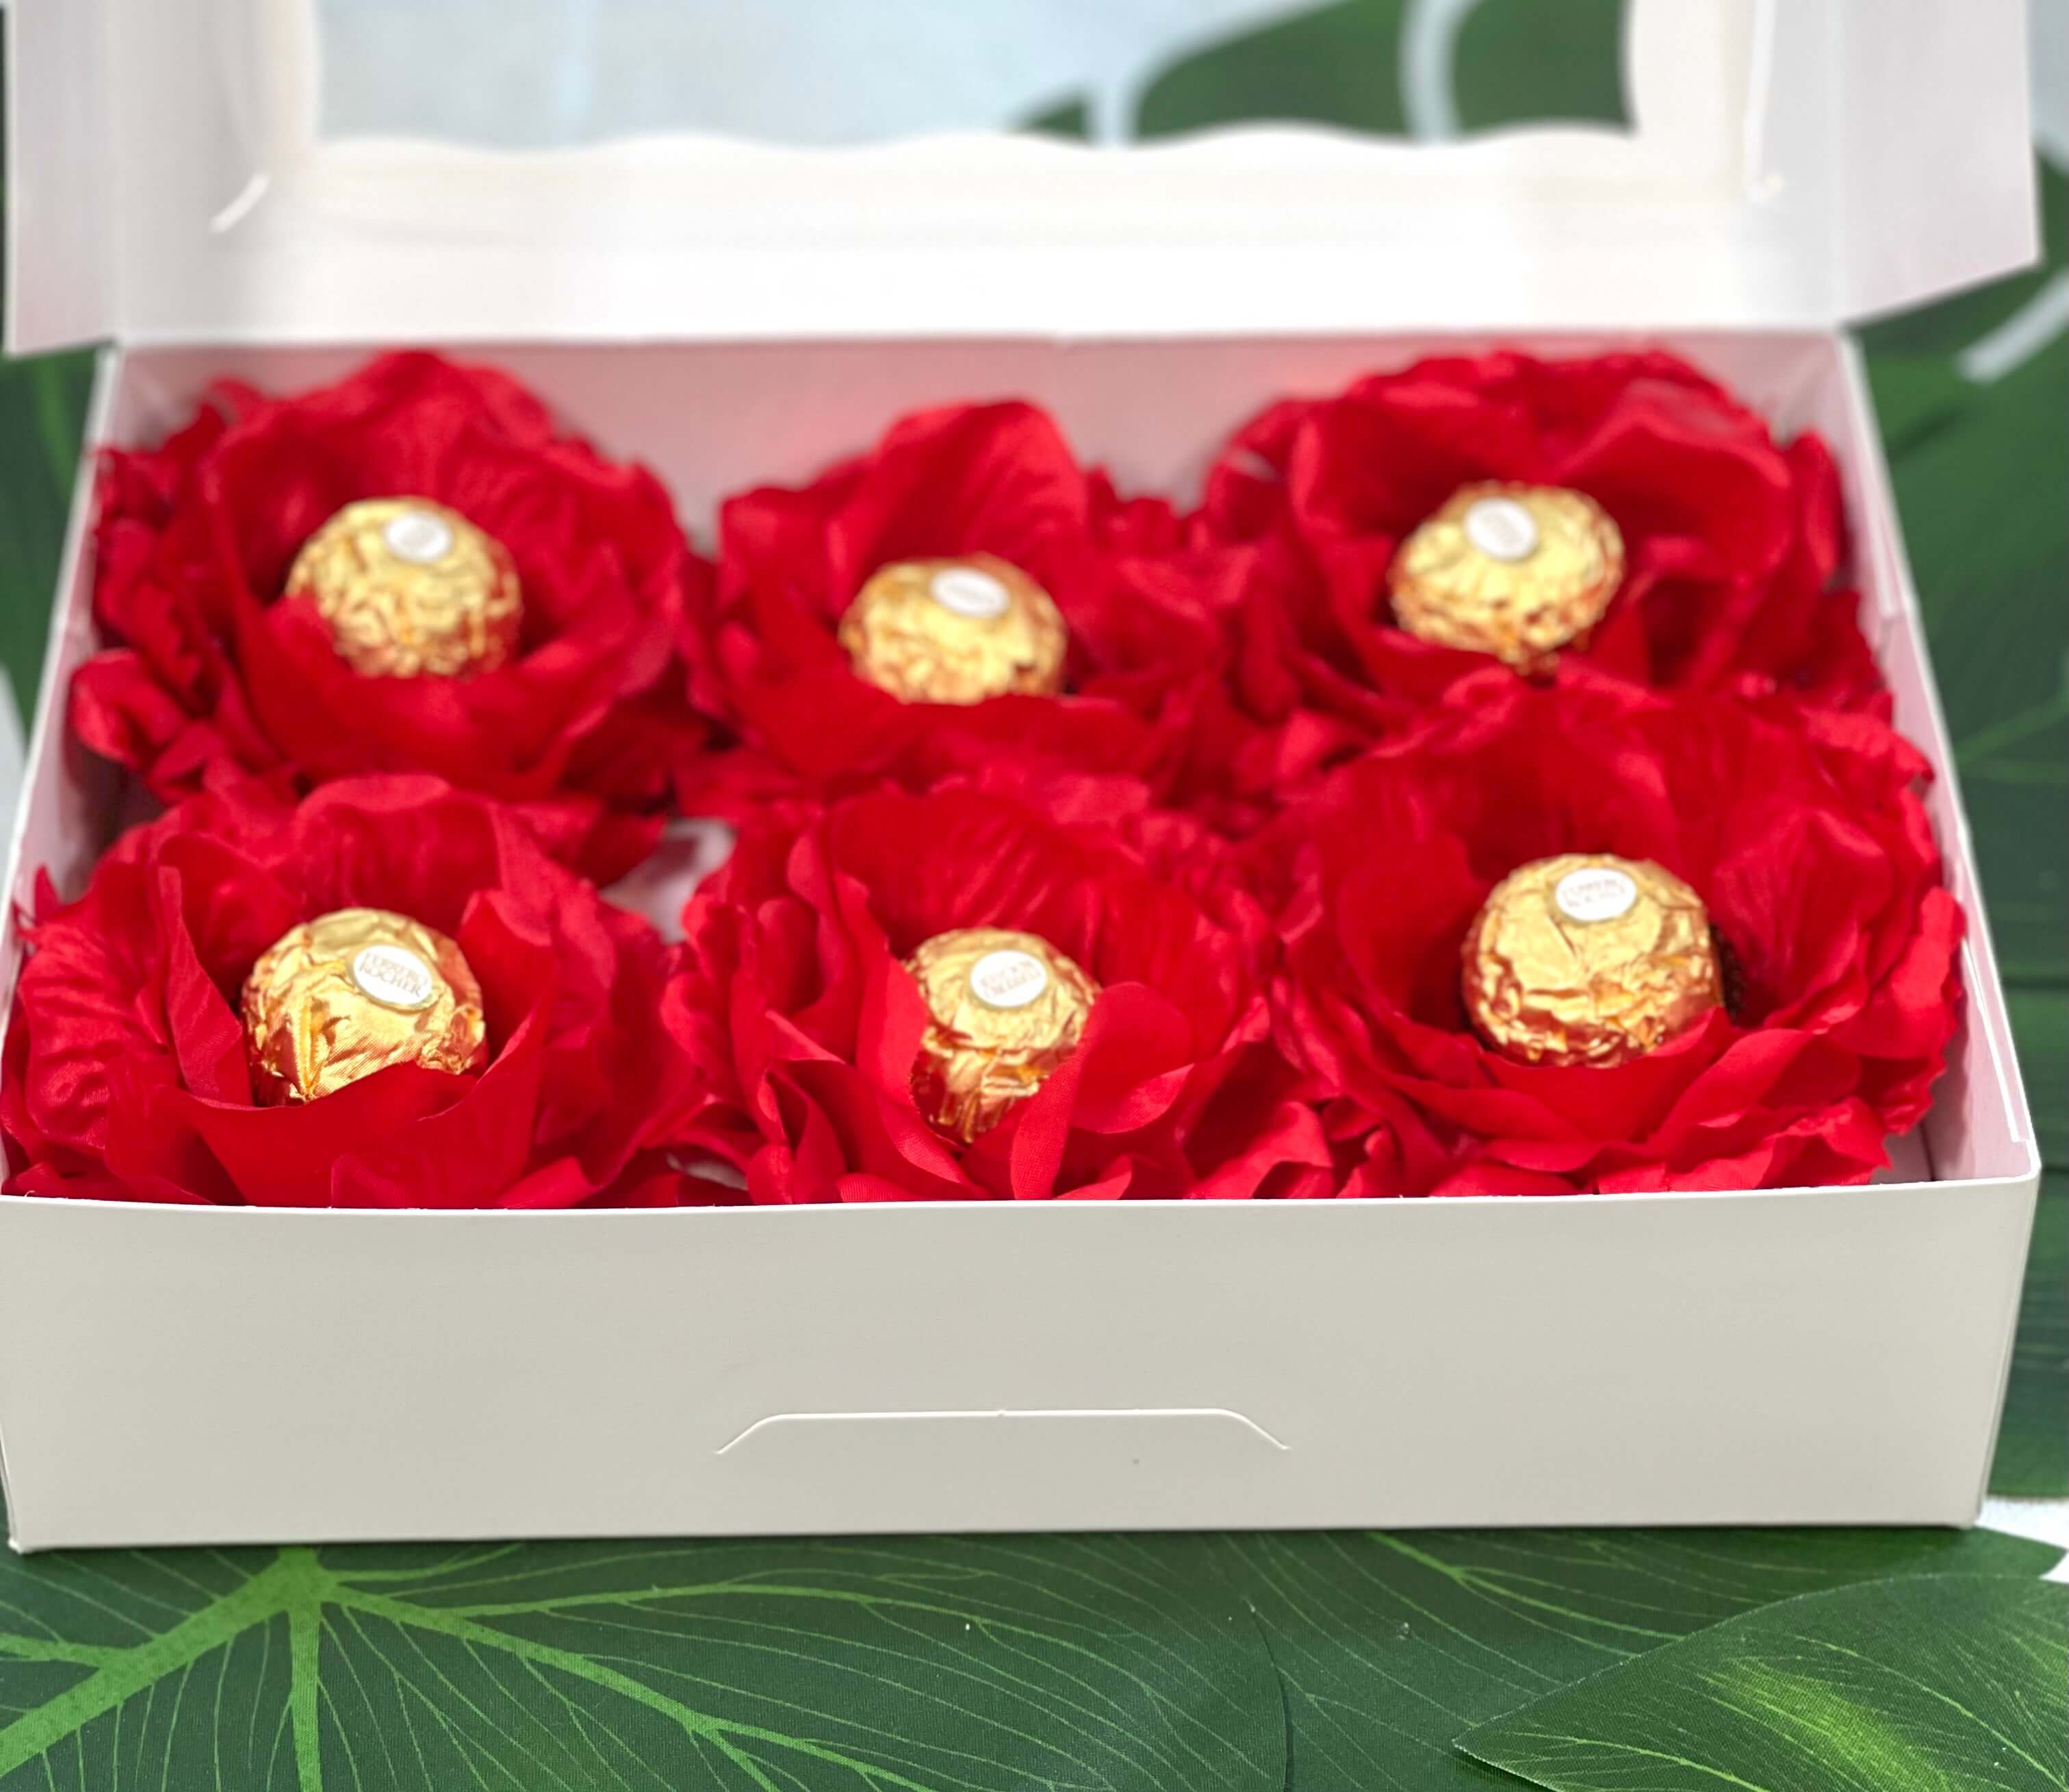 Unforgettable Gift For Valentine's Day. Red Flowers & Chocolate